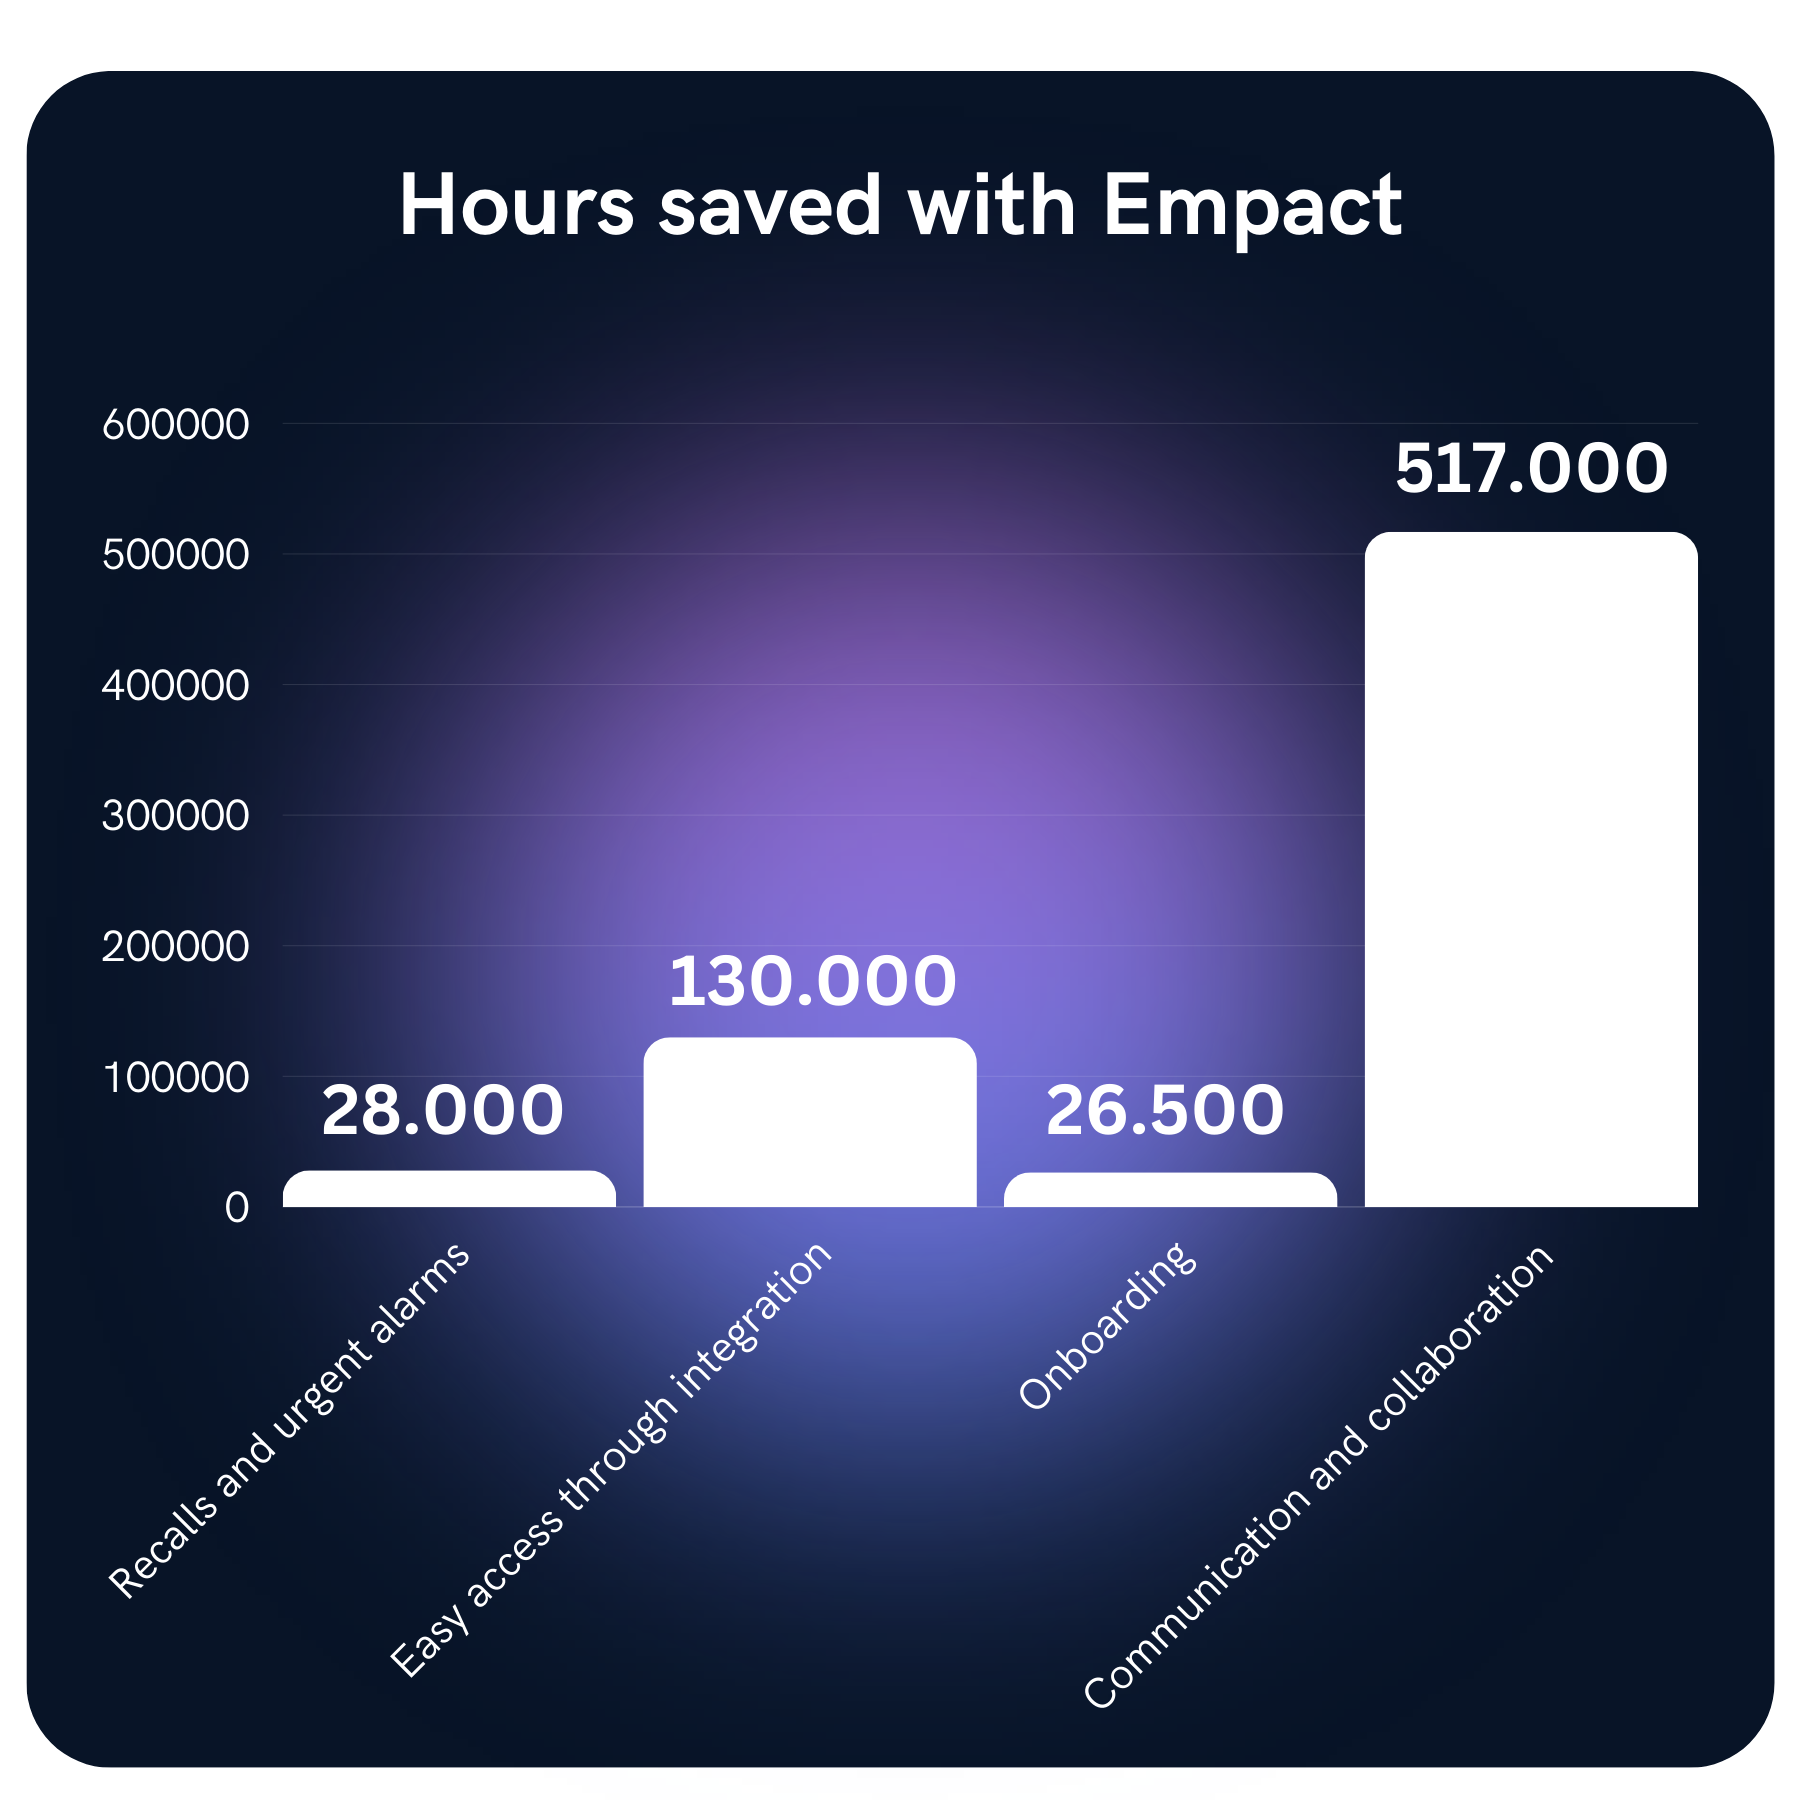 Saved hours with Empact